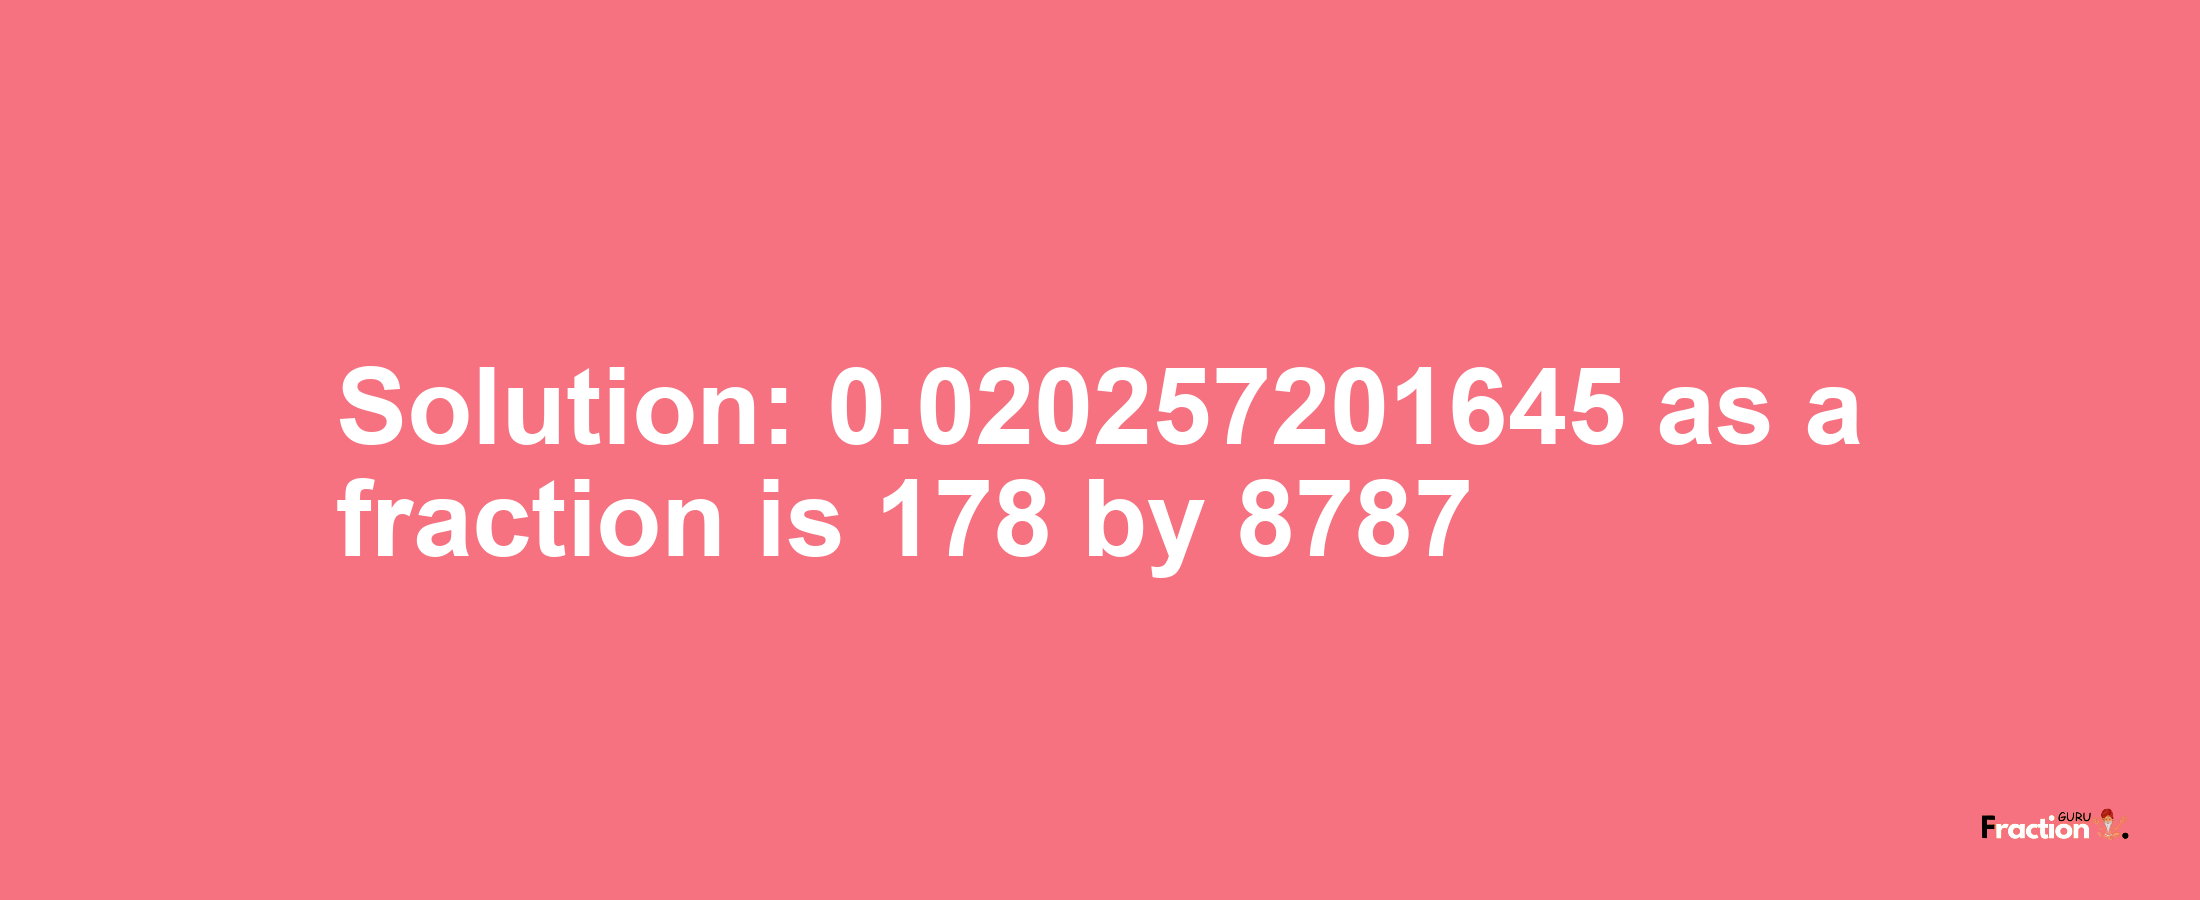 Solution:0.020257201645 as a fraction is 178/8787